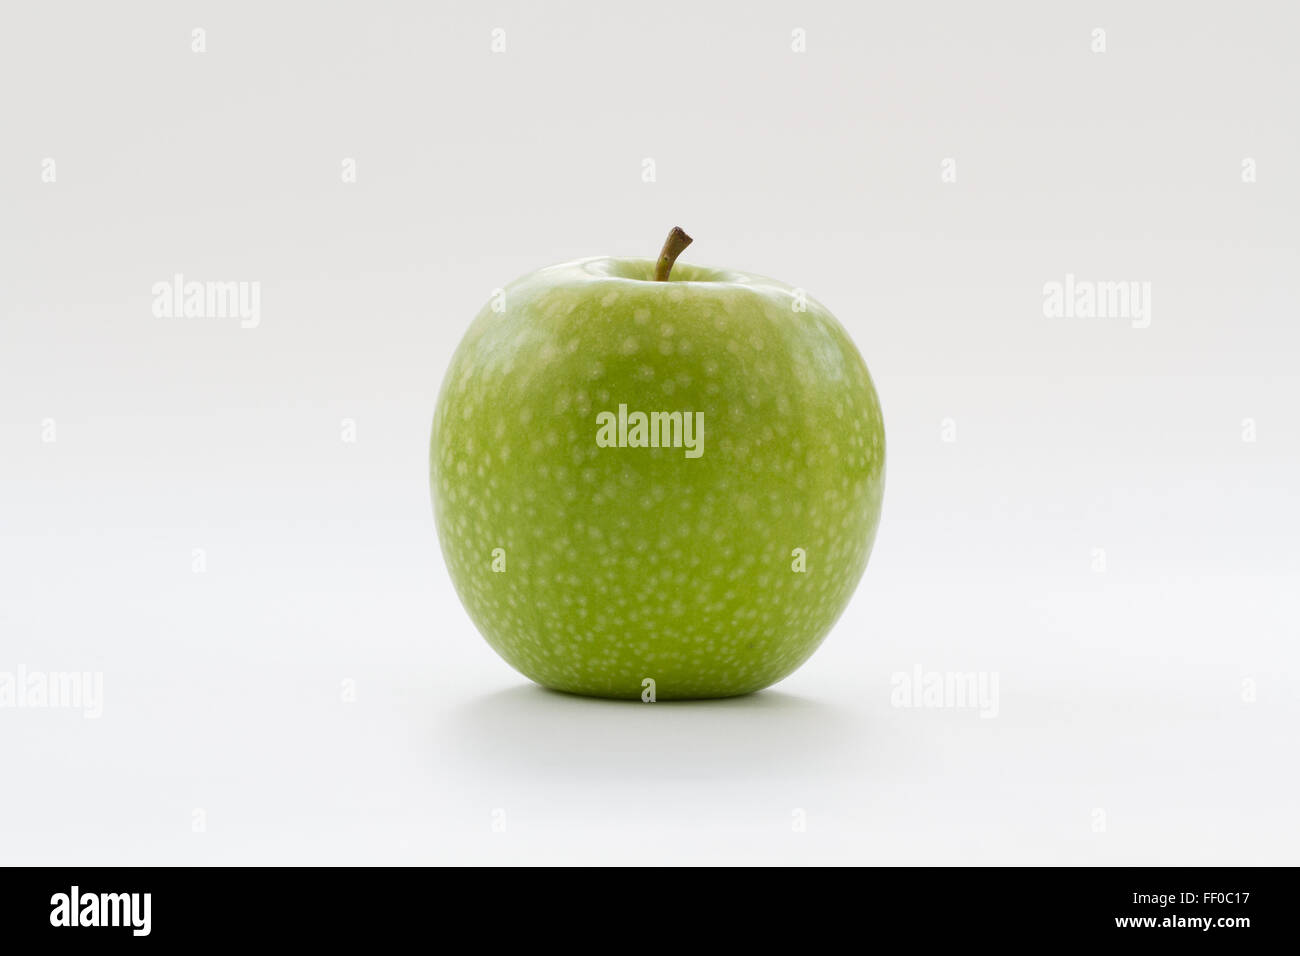 A fresh, green apple on an isolated white background. Stock Photo